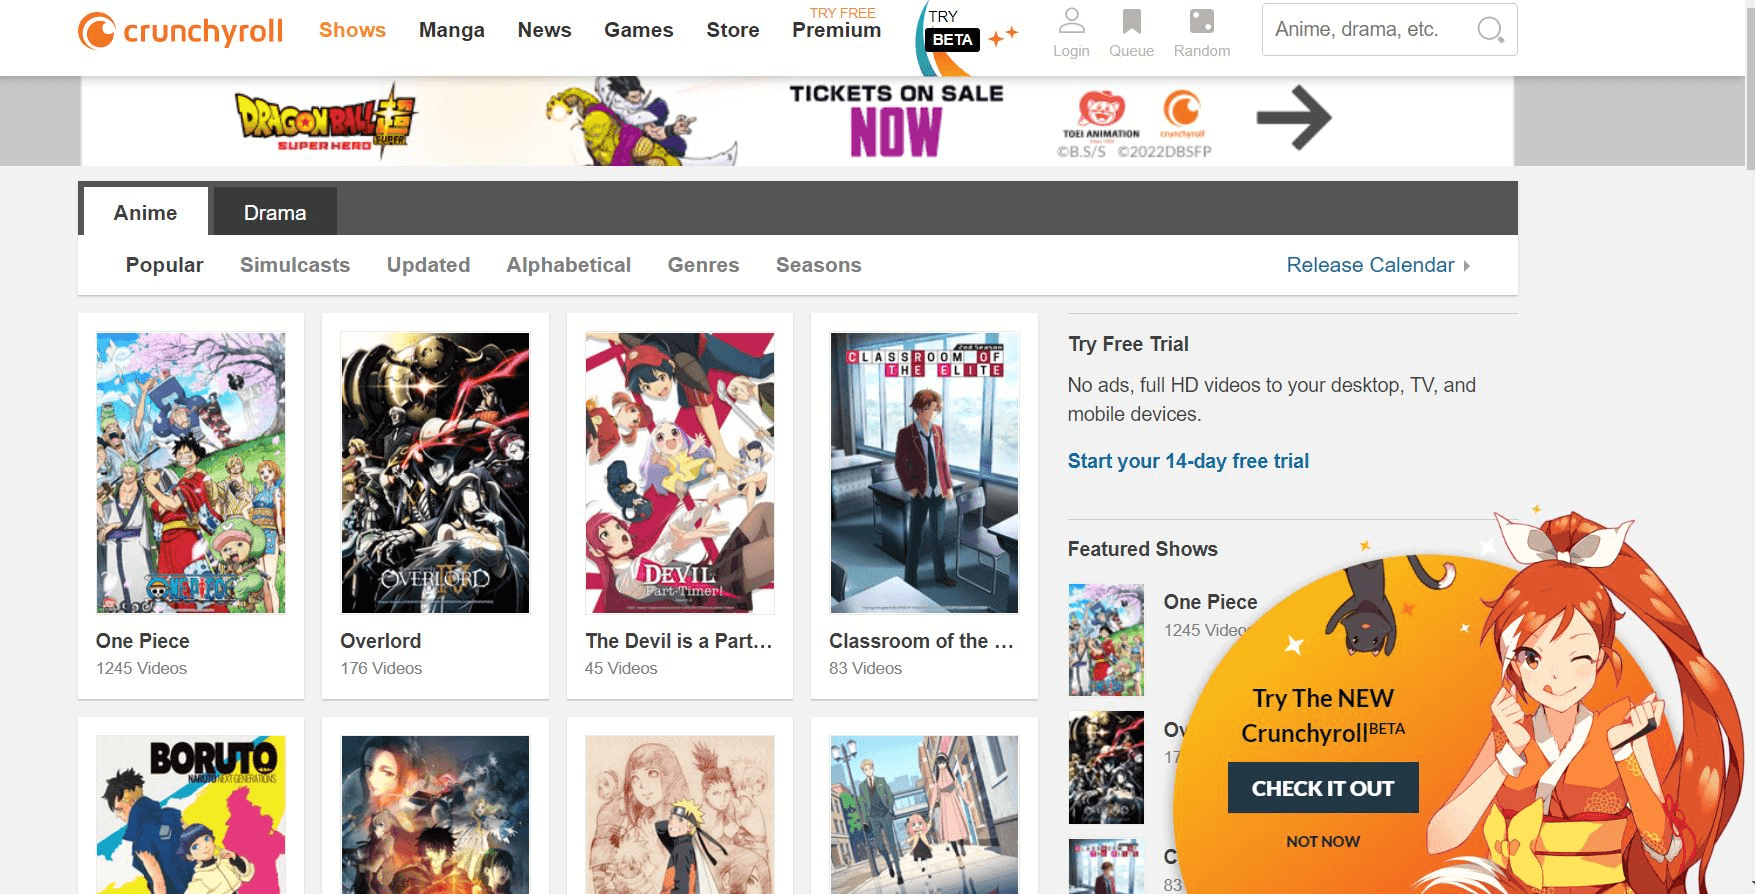 A free version is available but is not ad-free, as are parental controls. Subscribers must follow Crunchyroll's terms. Upgrade plan for ad-free viewing.